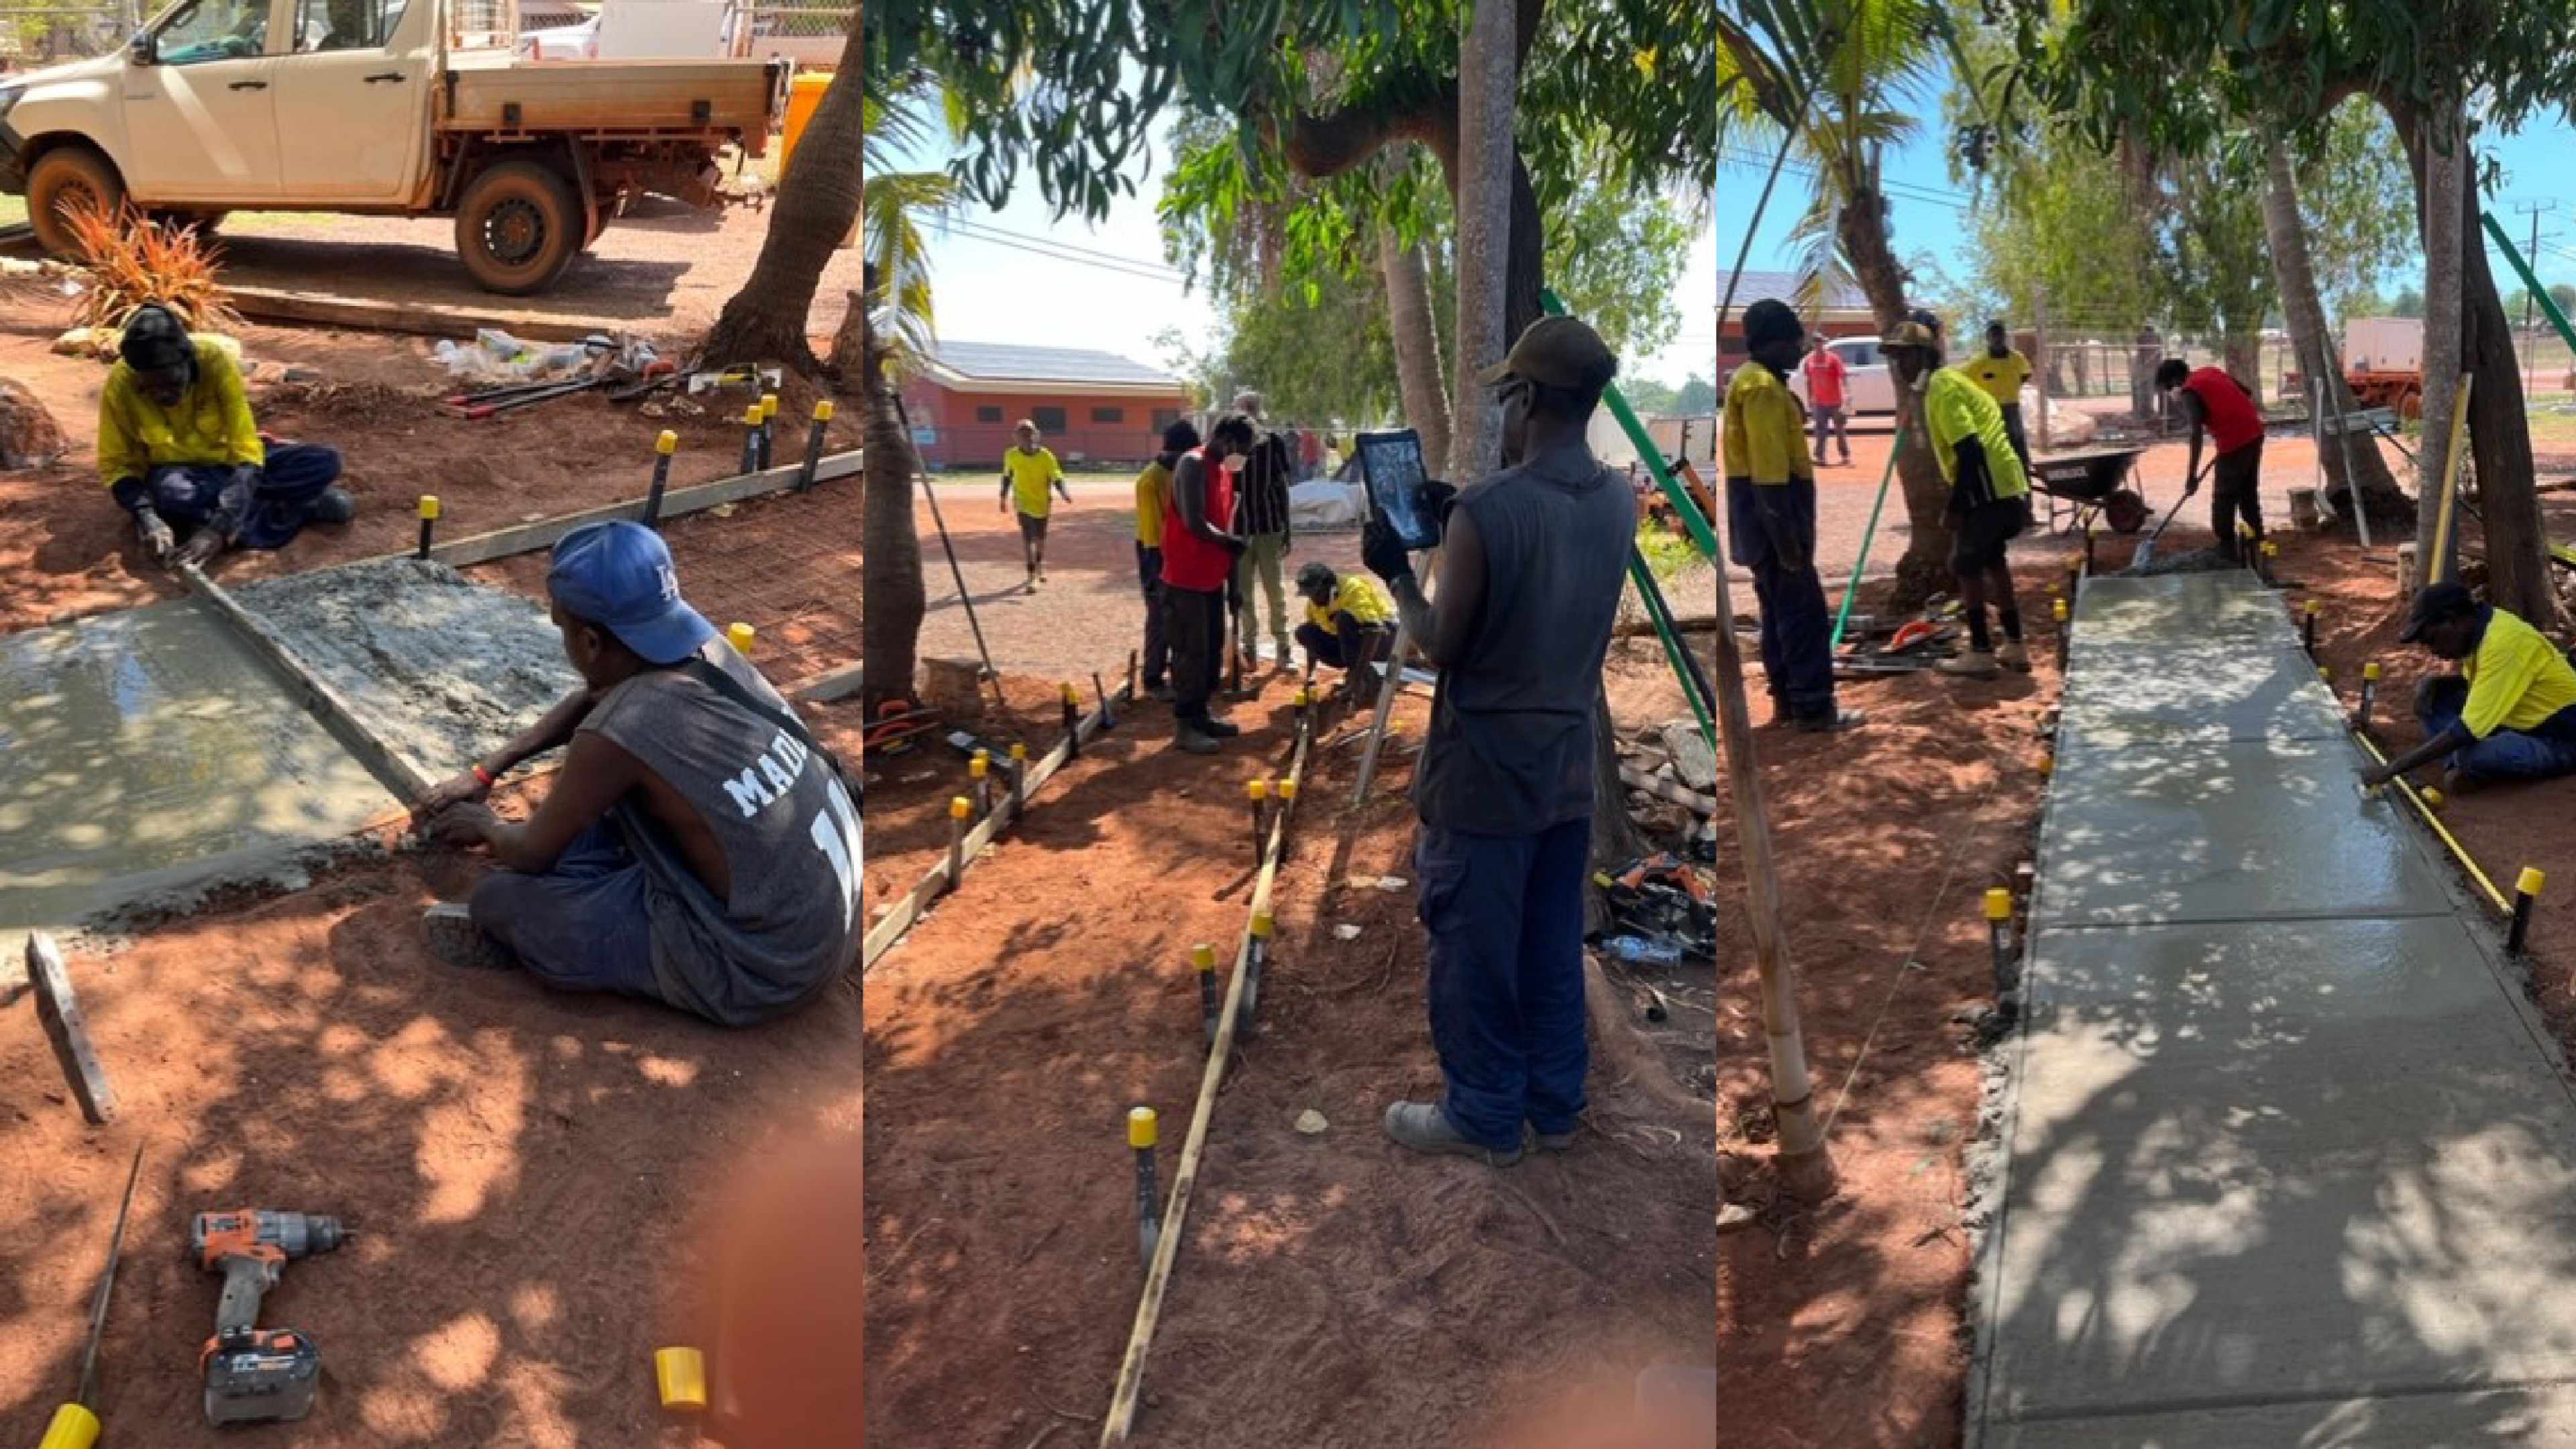 3 Progress shots of students using their new skills to build a footpath. 